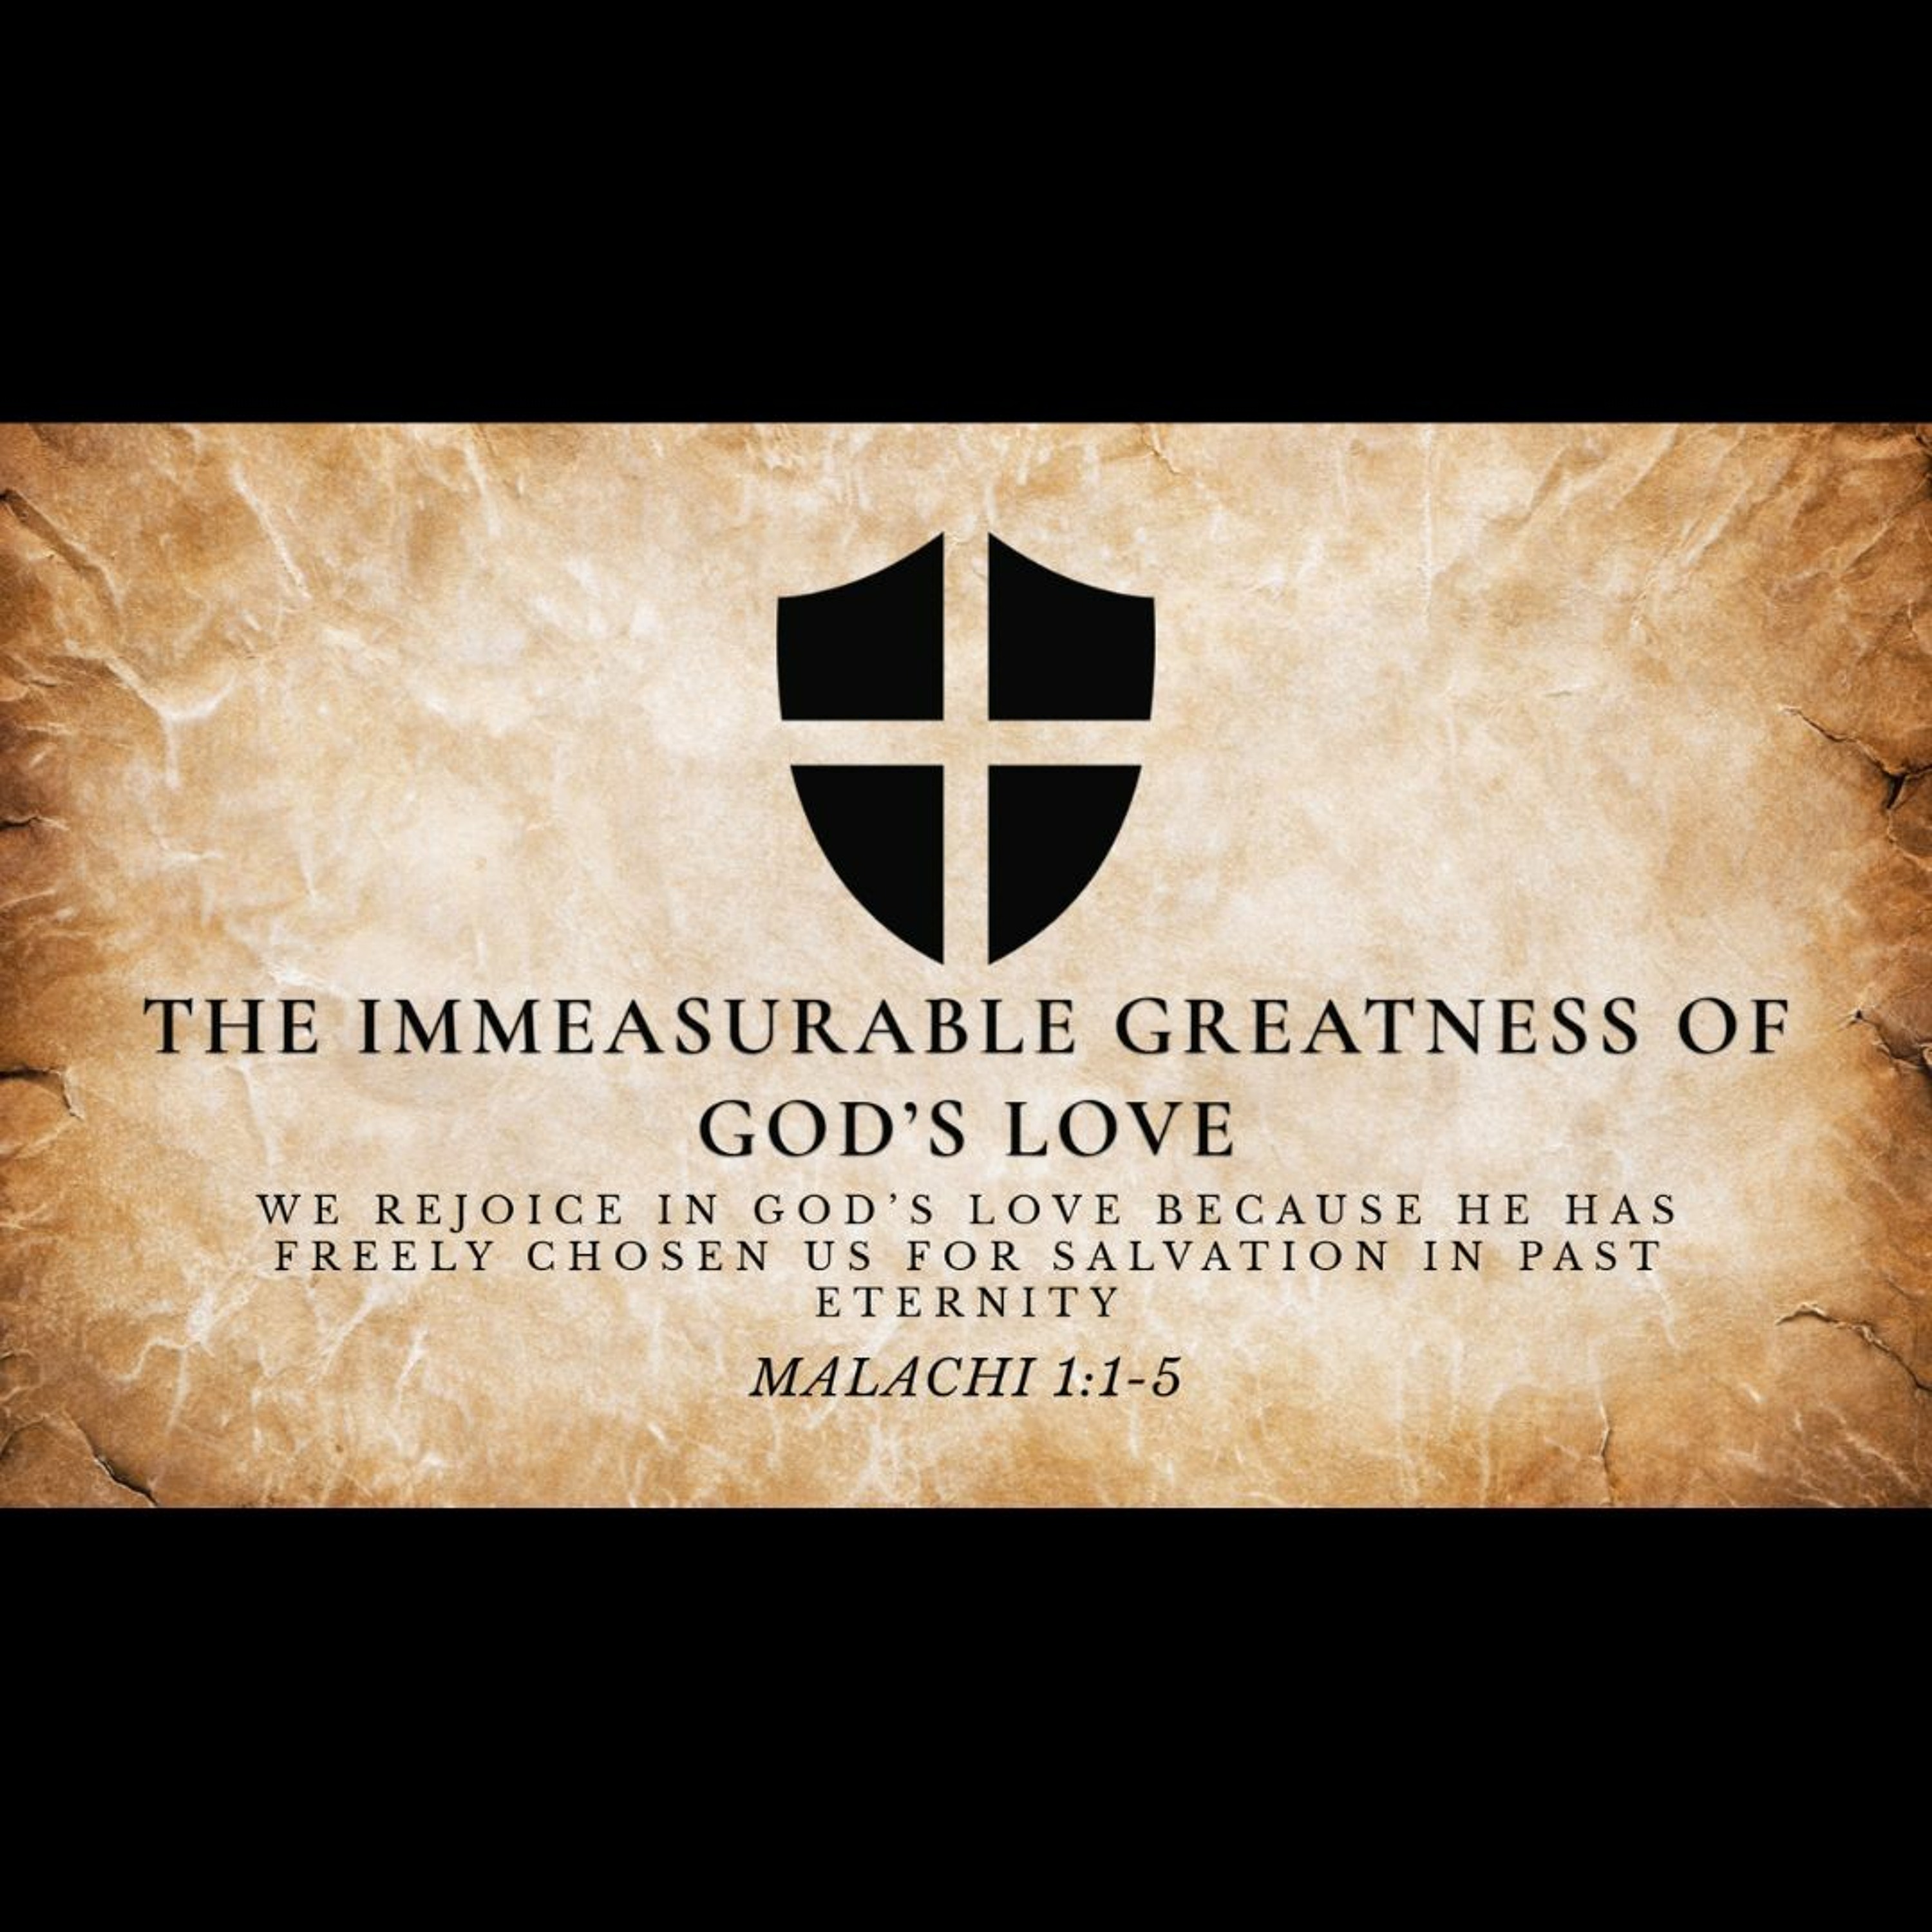 The Immeasurable Greatness of God's Love (Malachi 1:1-5)